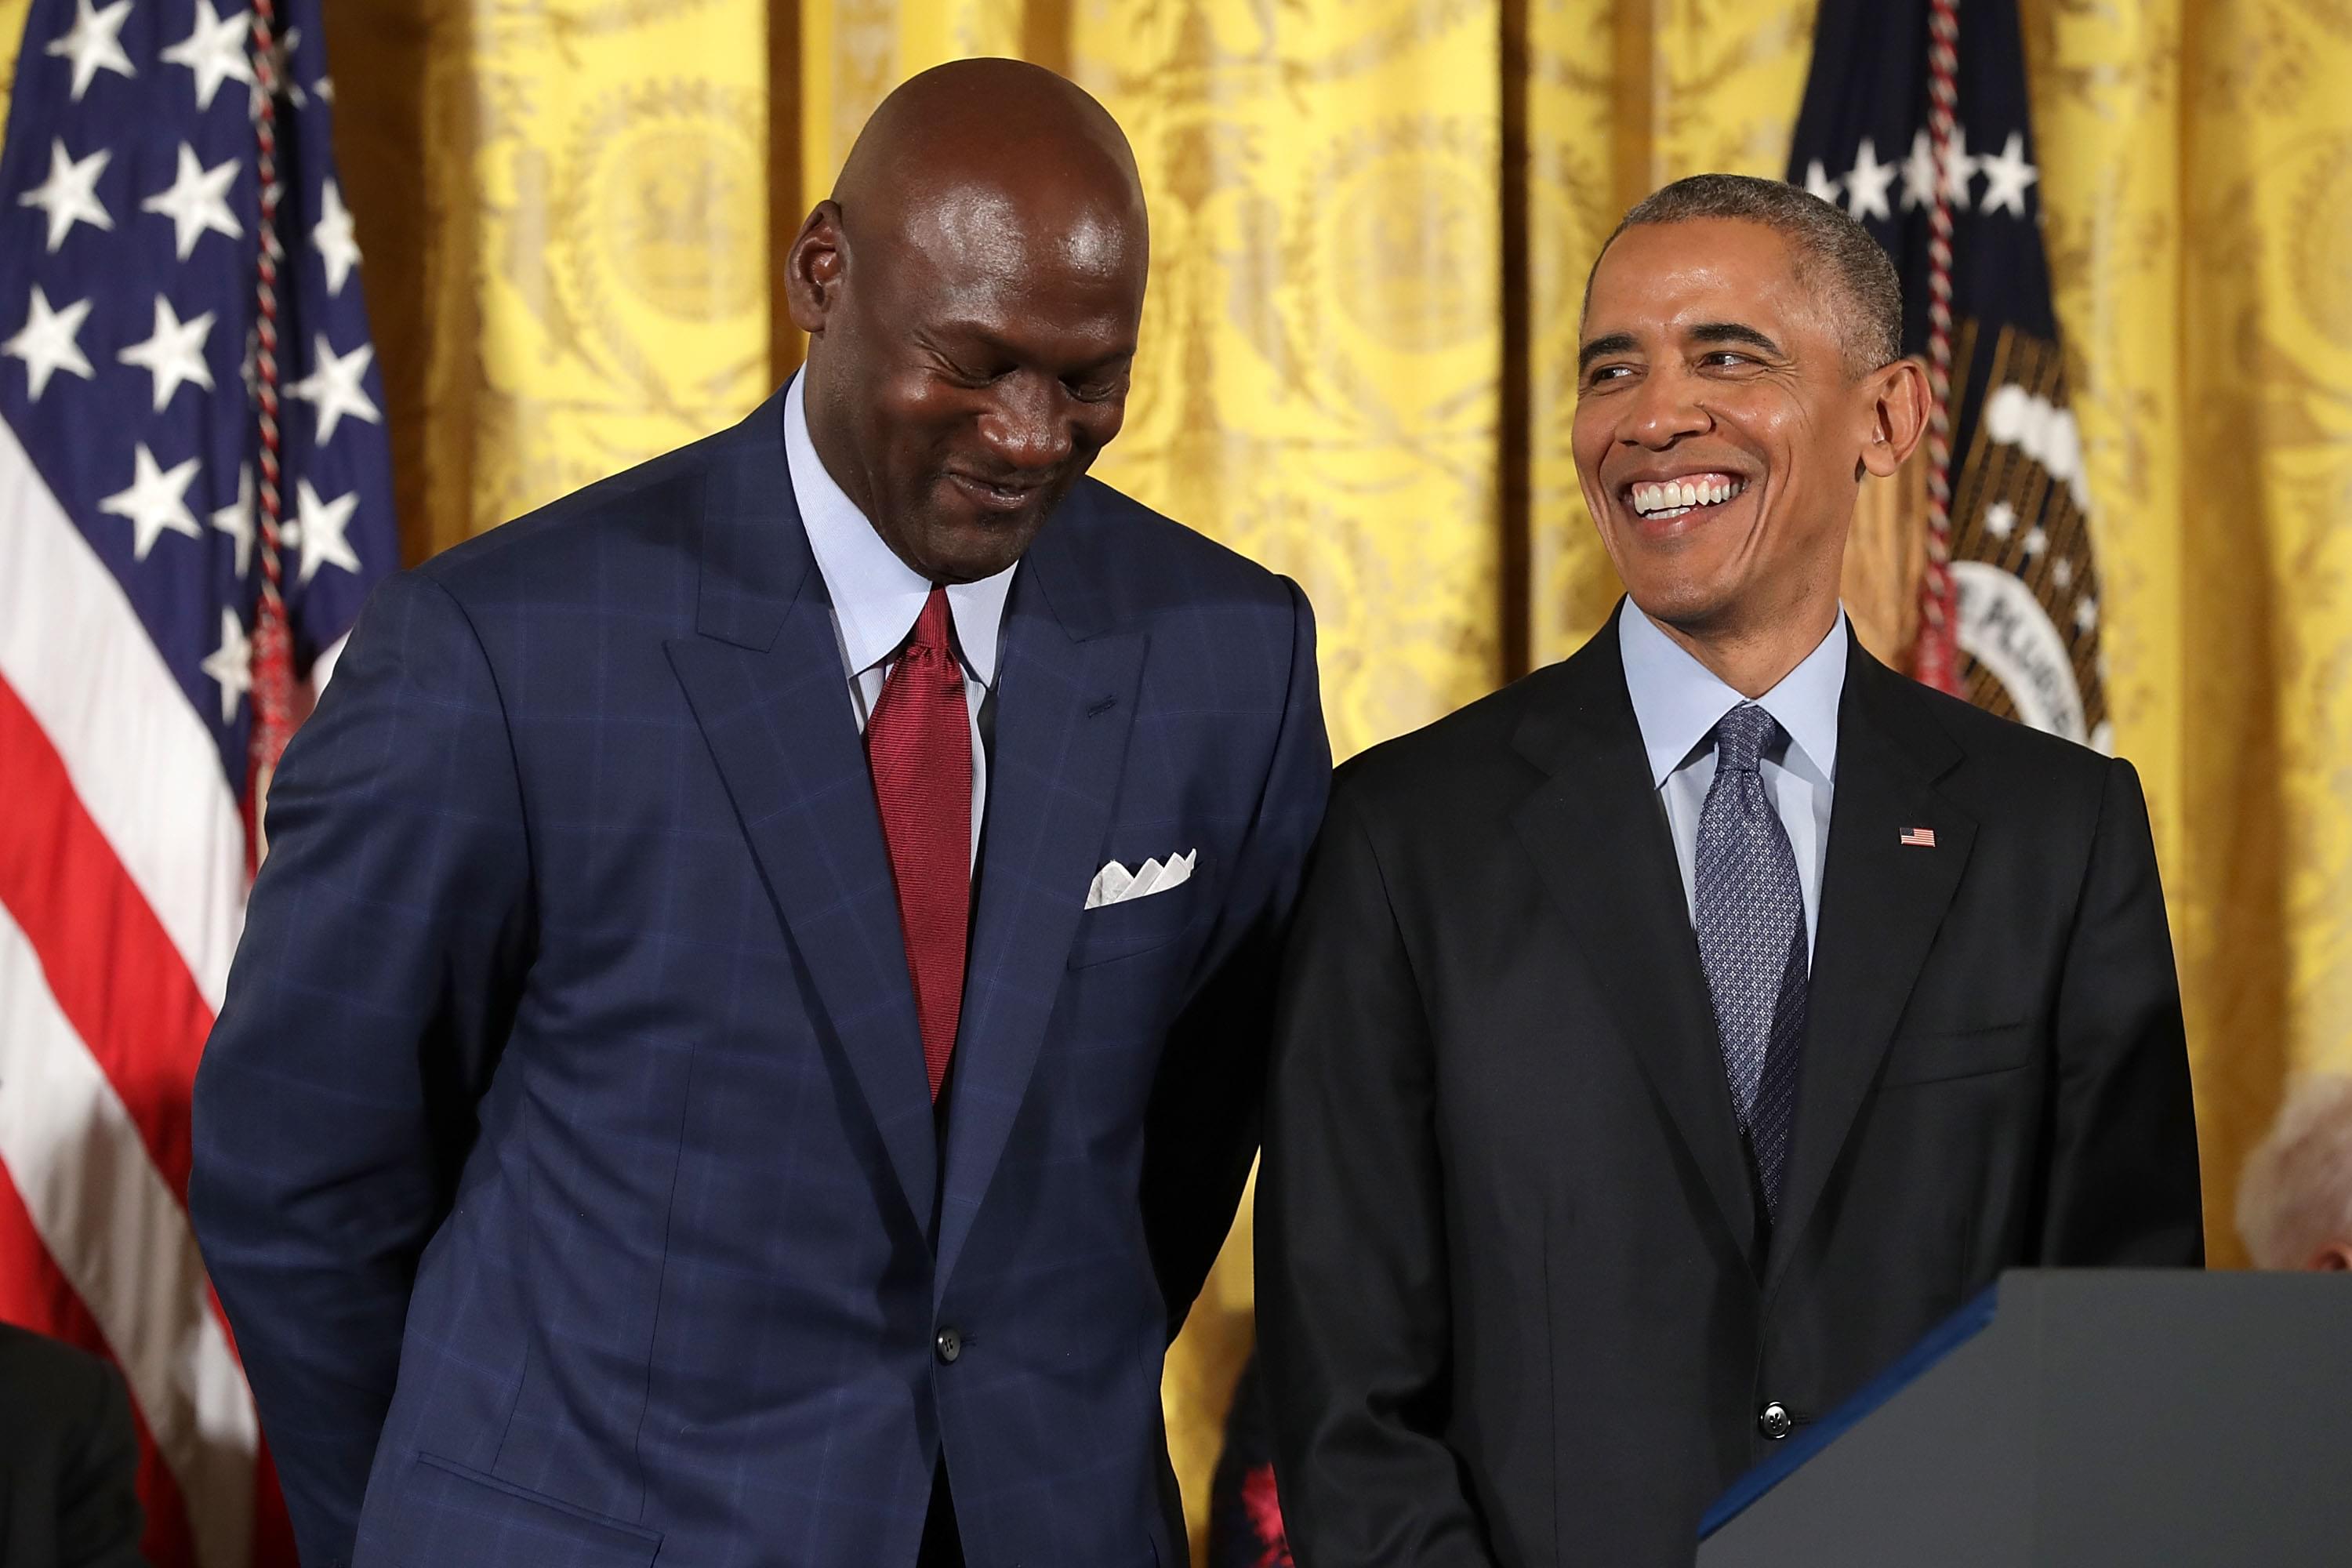 President Obama Awards Michael Jordan With Medal Of Freedom [WATCH]